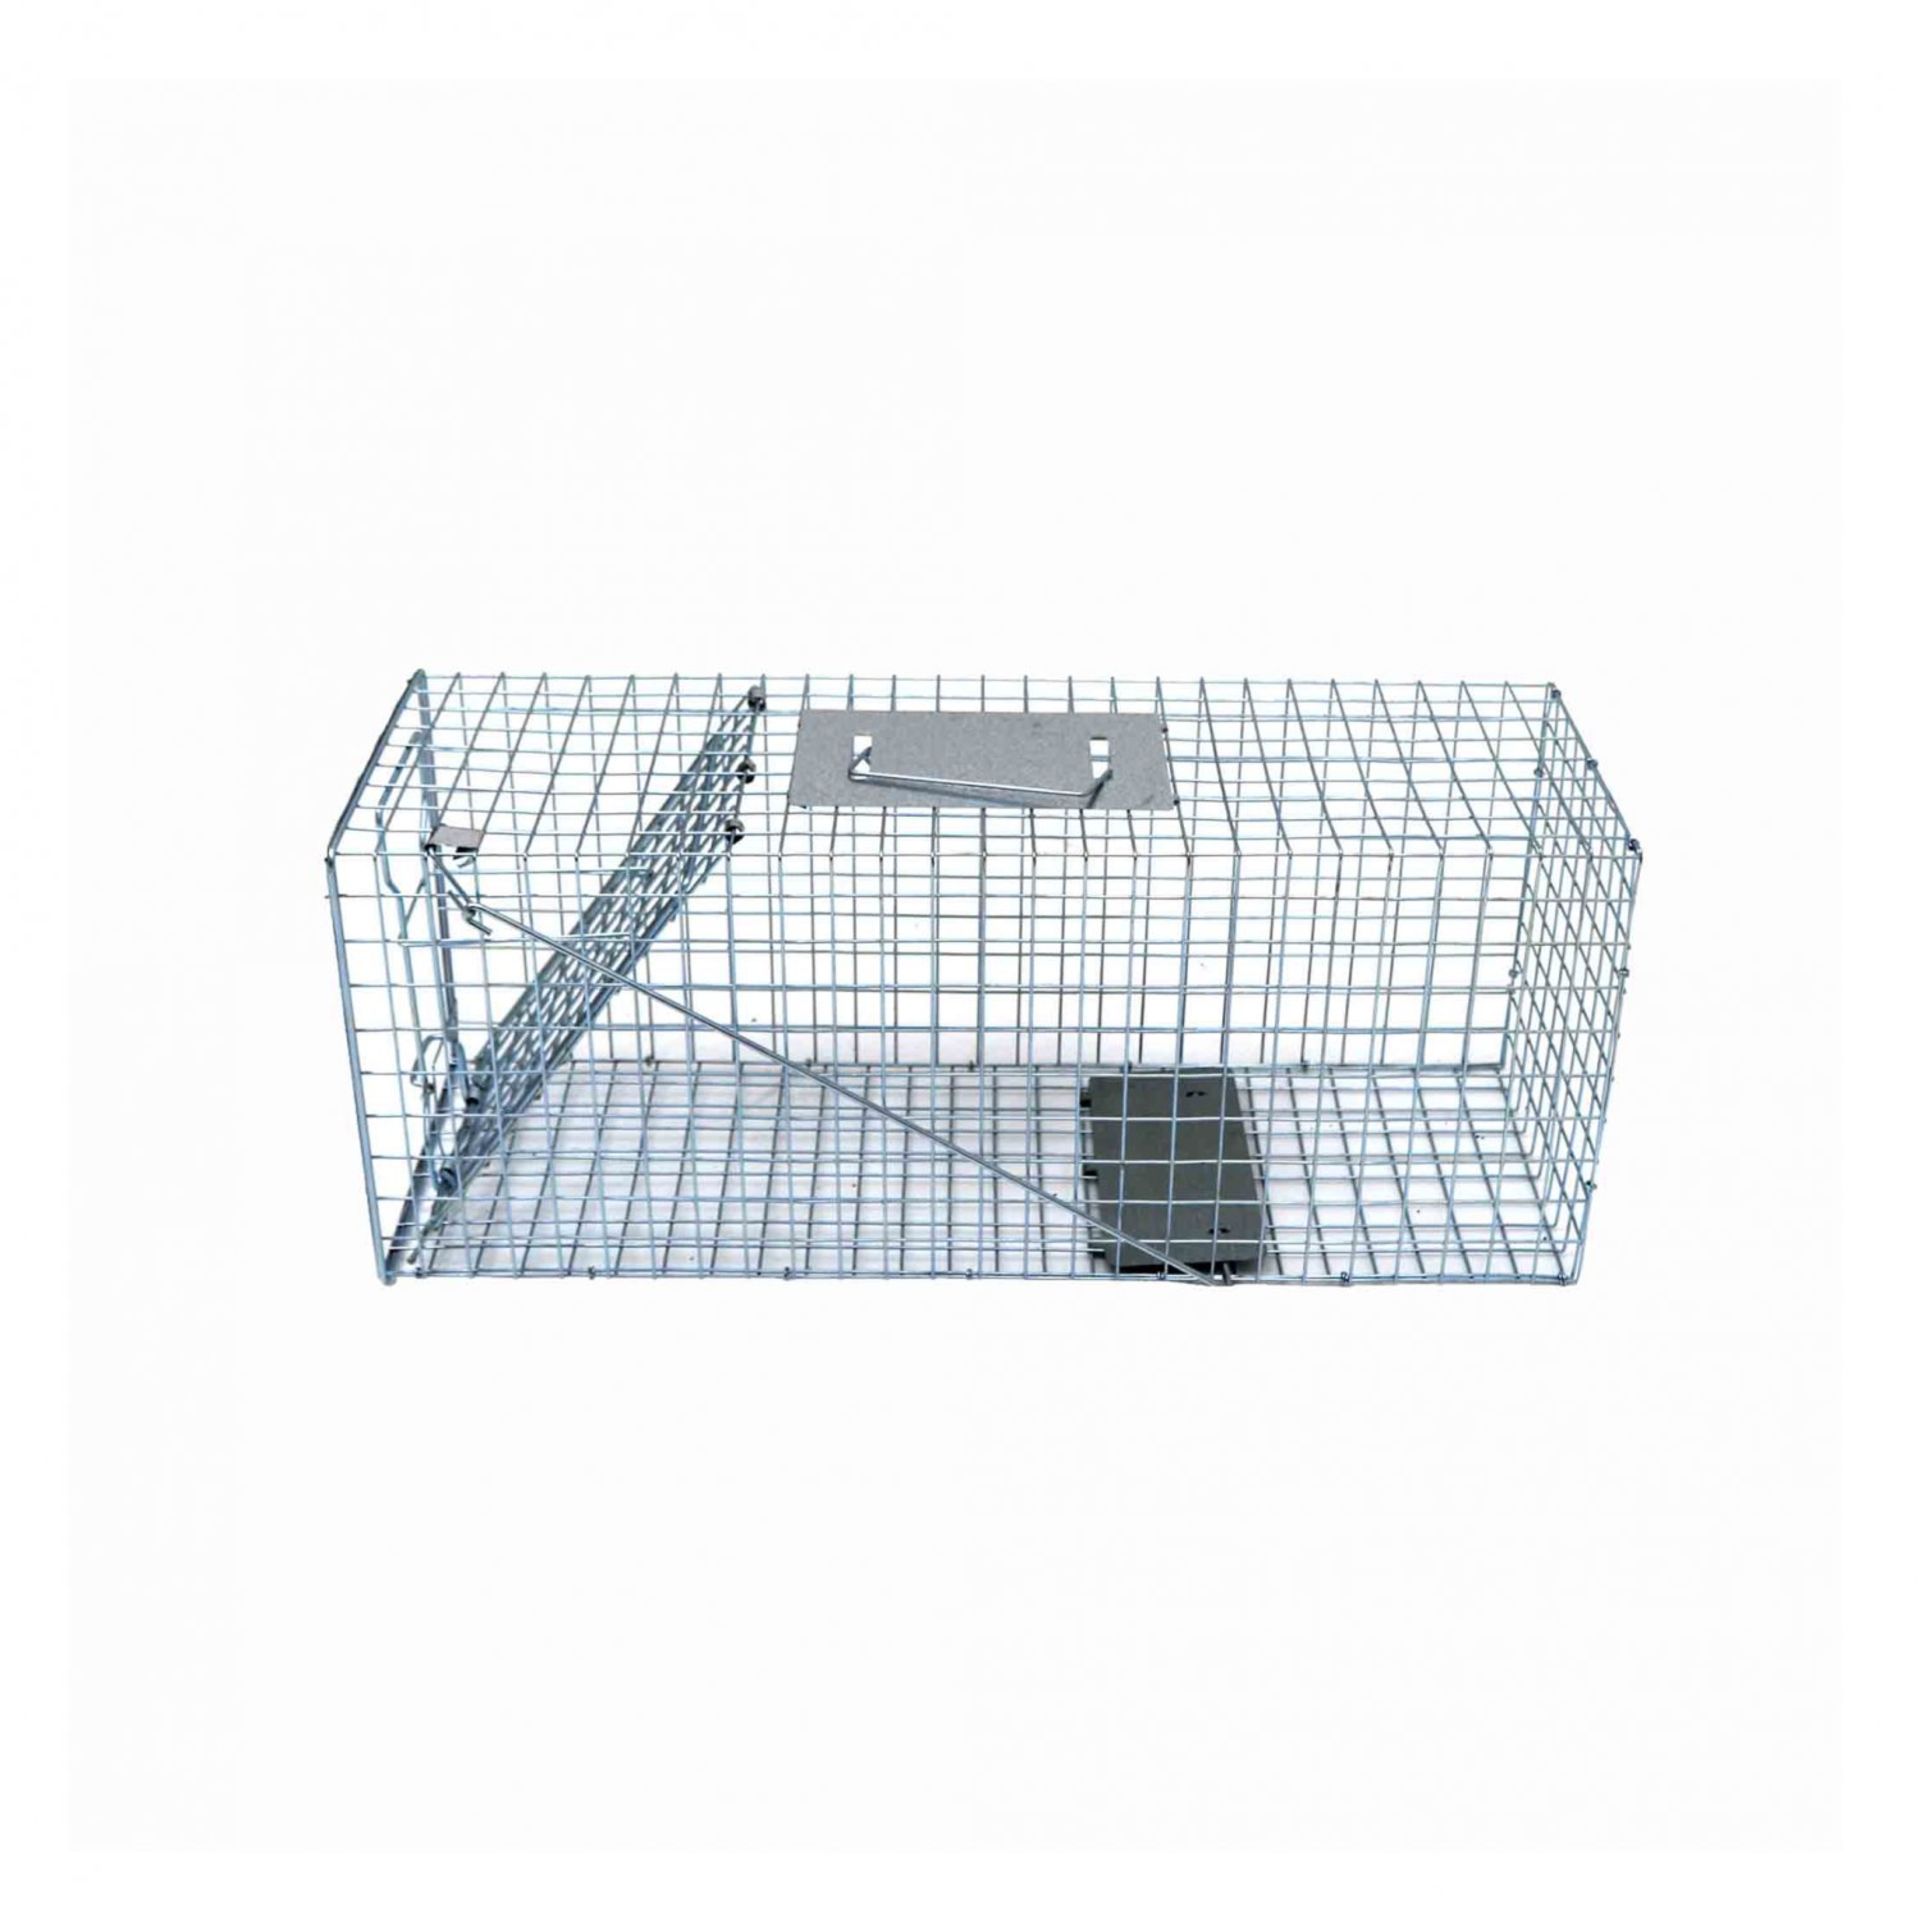 (PP25) Medium Humane Animal Rodent Rat Pest Trap Cage Our humane animal trap is fully a... - Image 2 of 2